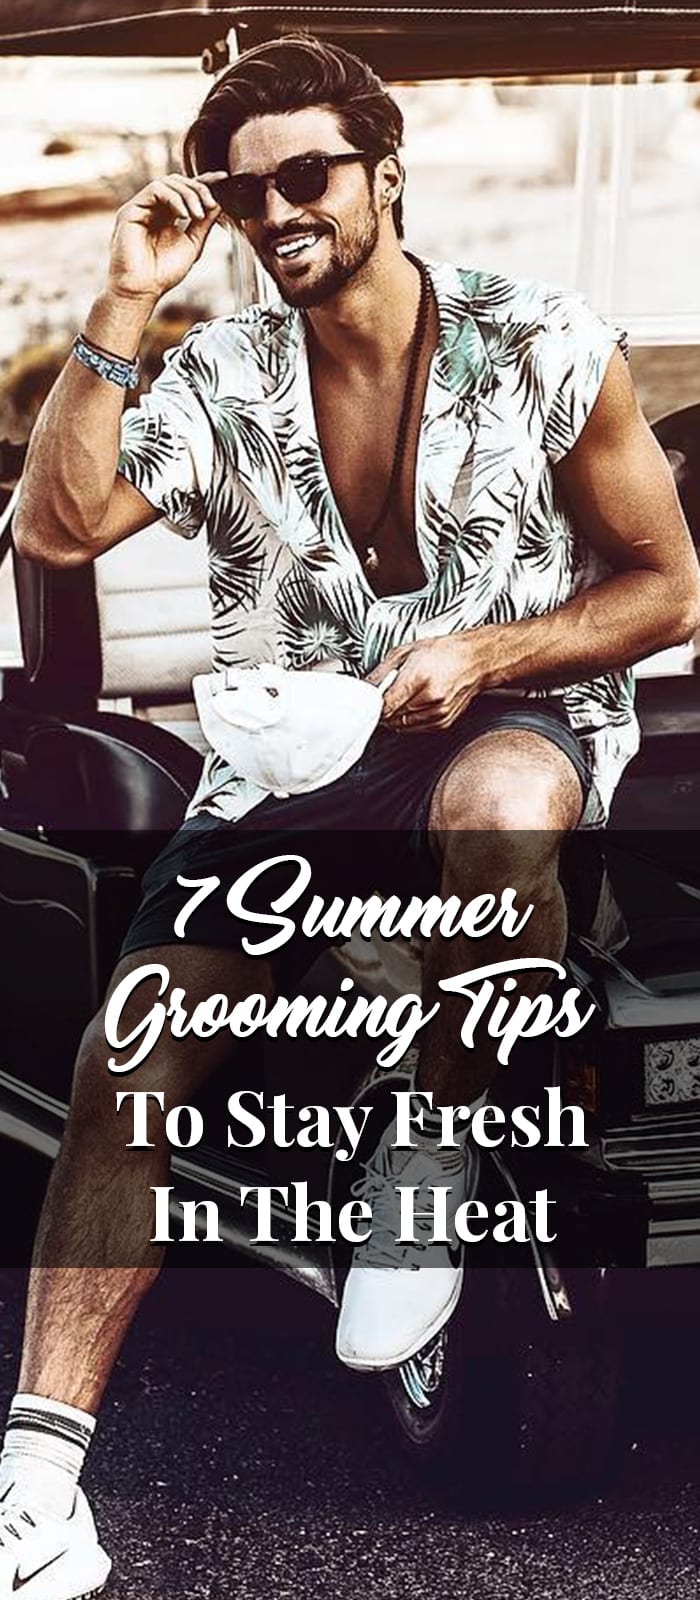 7 Summer Grooming Tips To Stay Fresh In The Heat